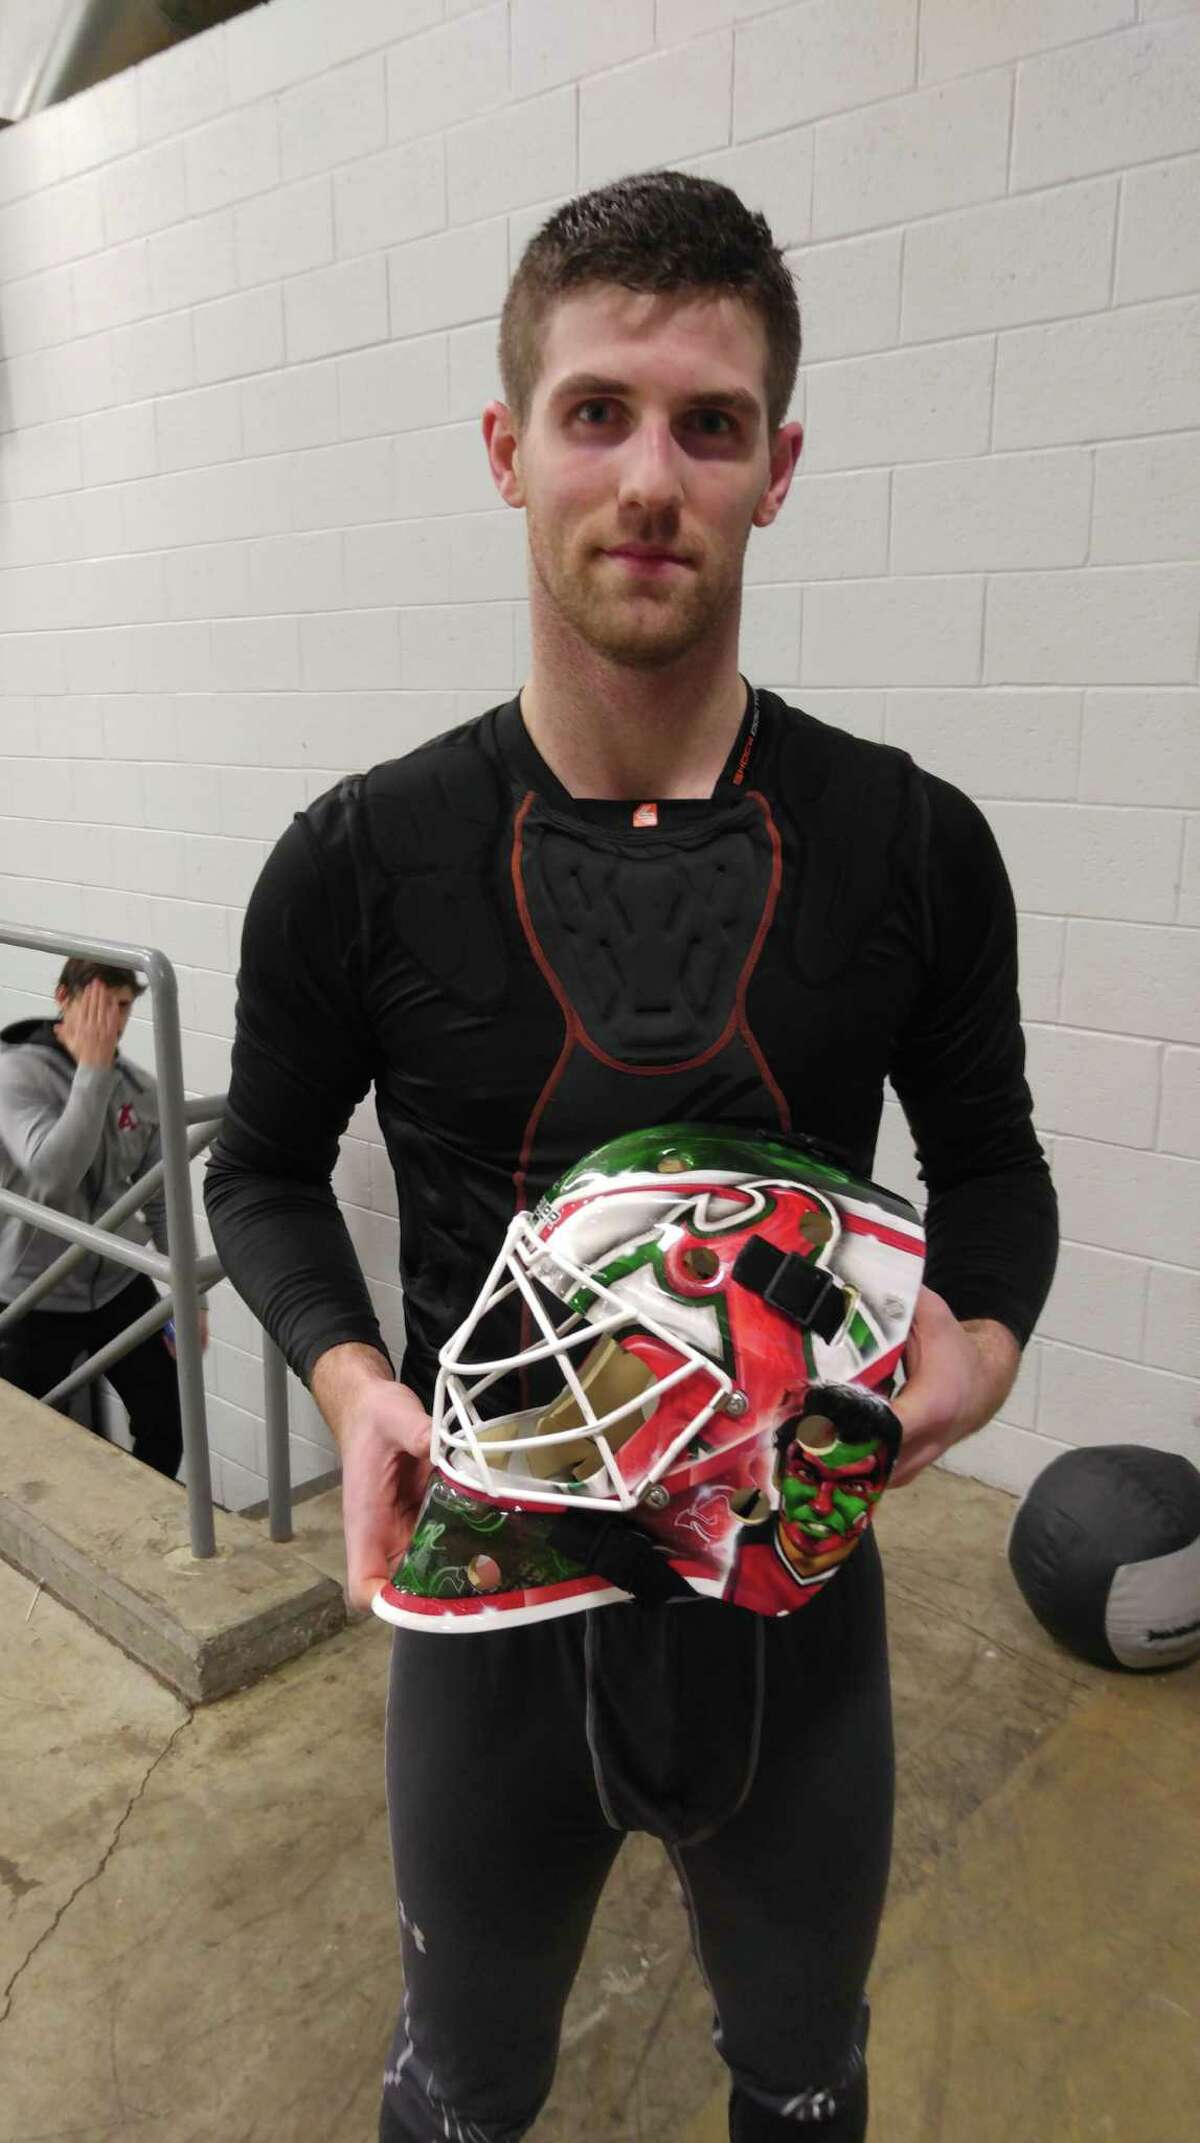 Goalie Wedgewood re-signs with New Jersey Devils; Comets add 3 to roster